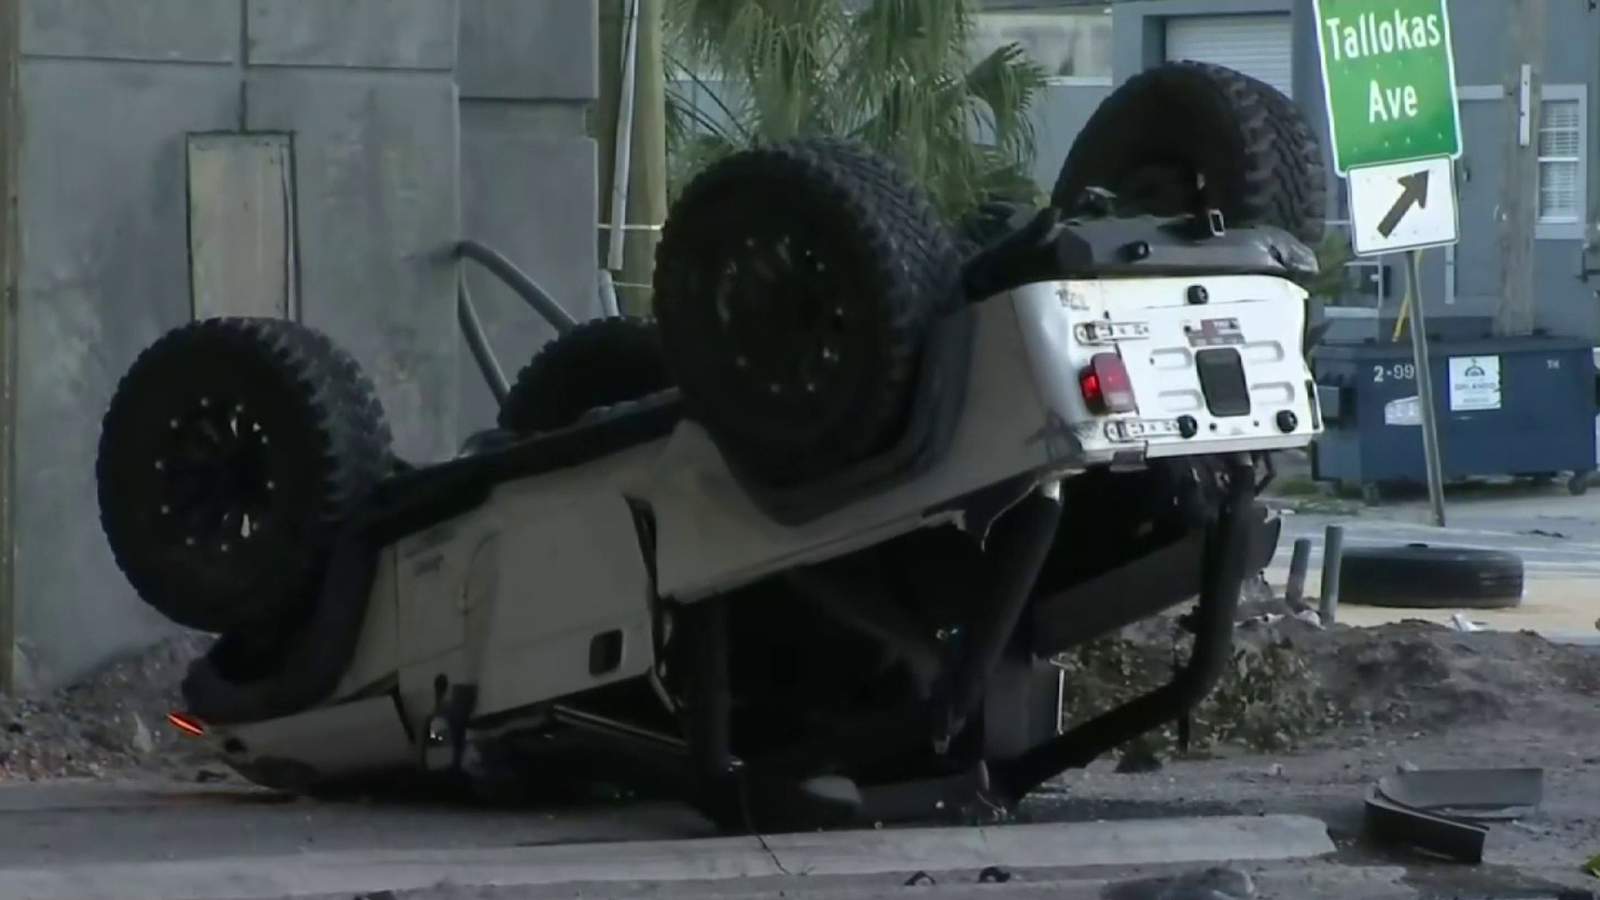 Video shows SUV dropping from I-4 and crashing on Kaley Street near downtown Orlando